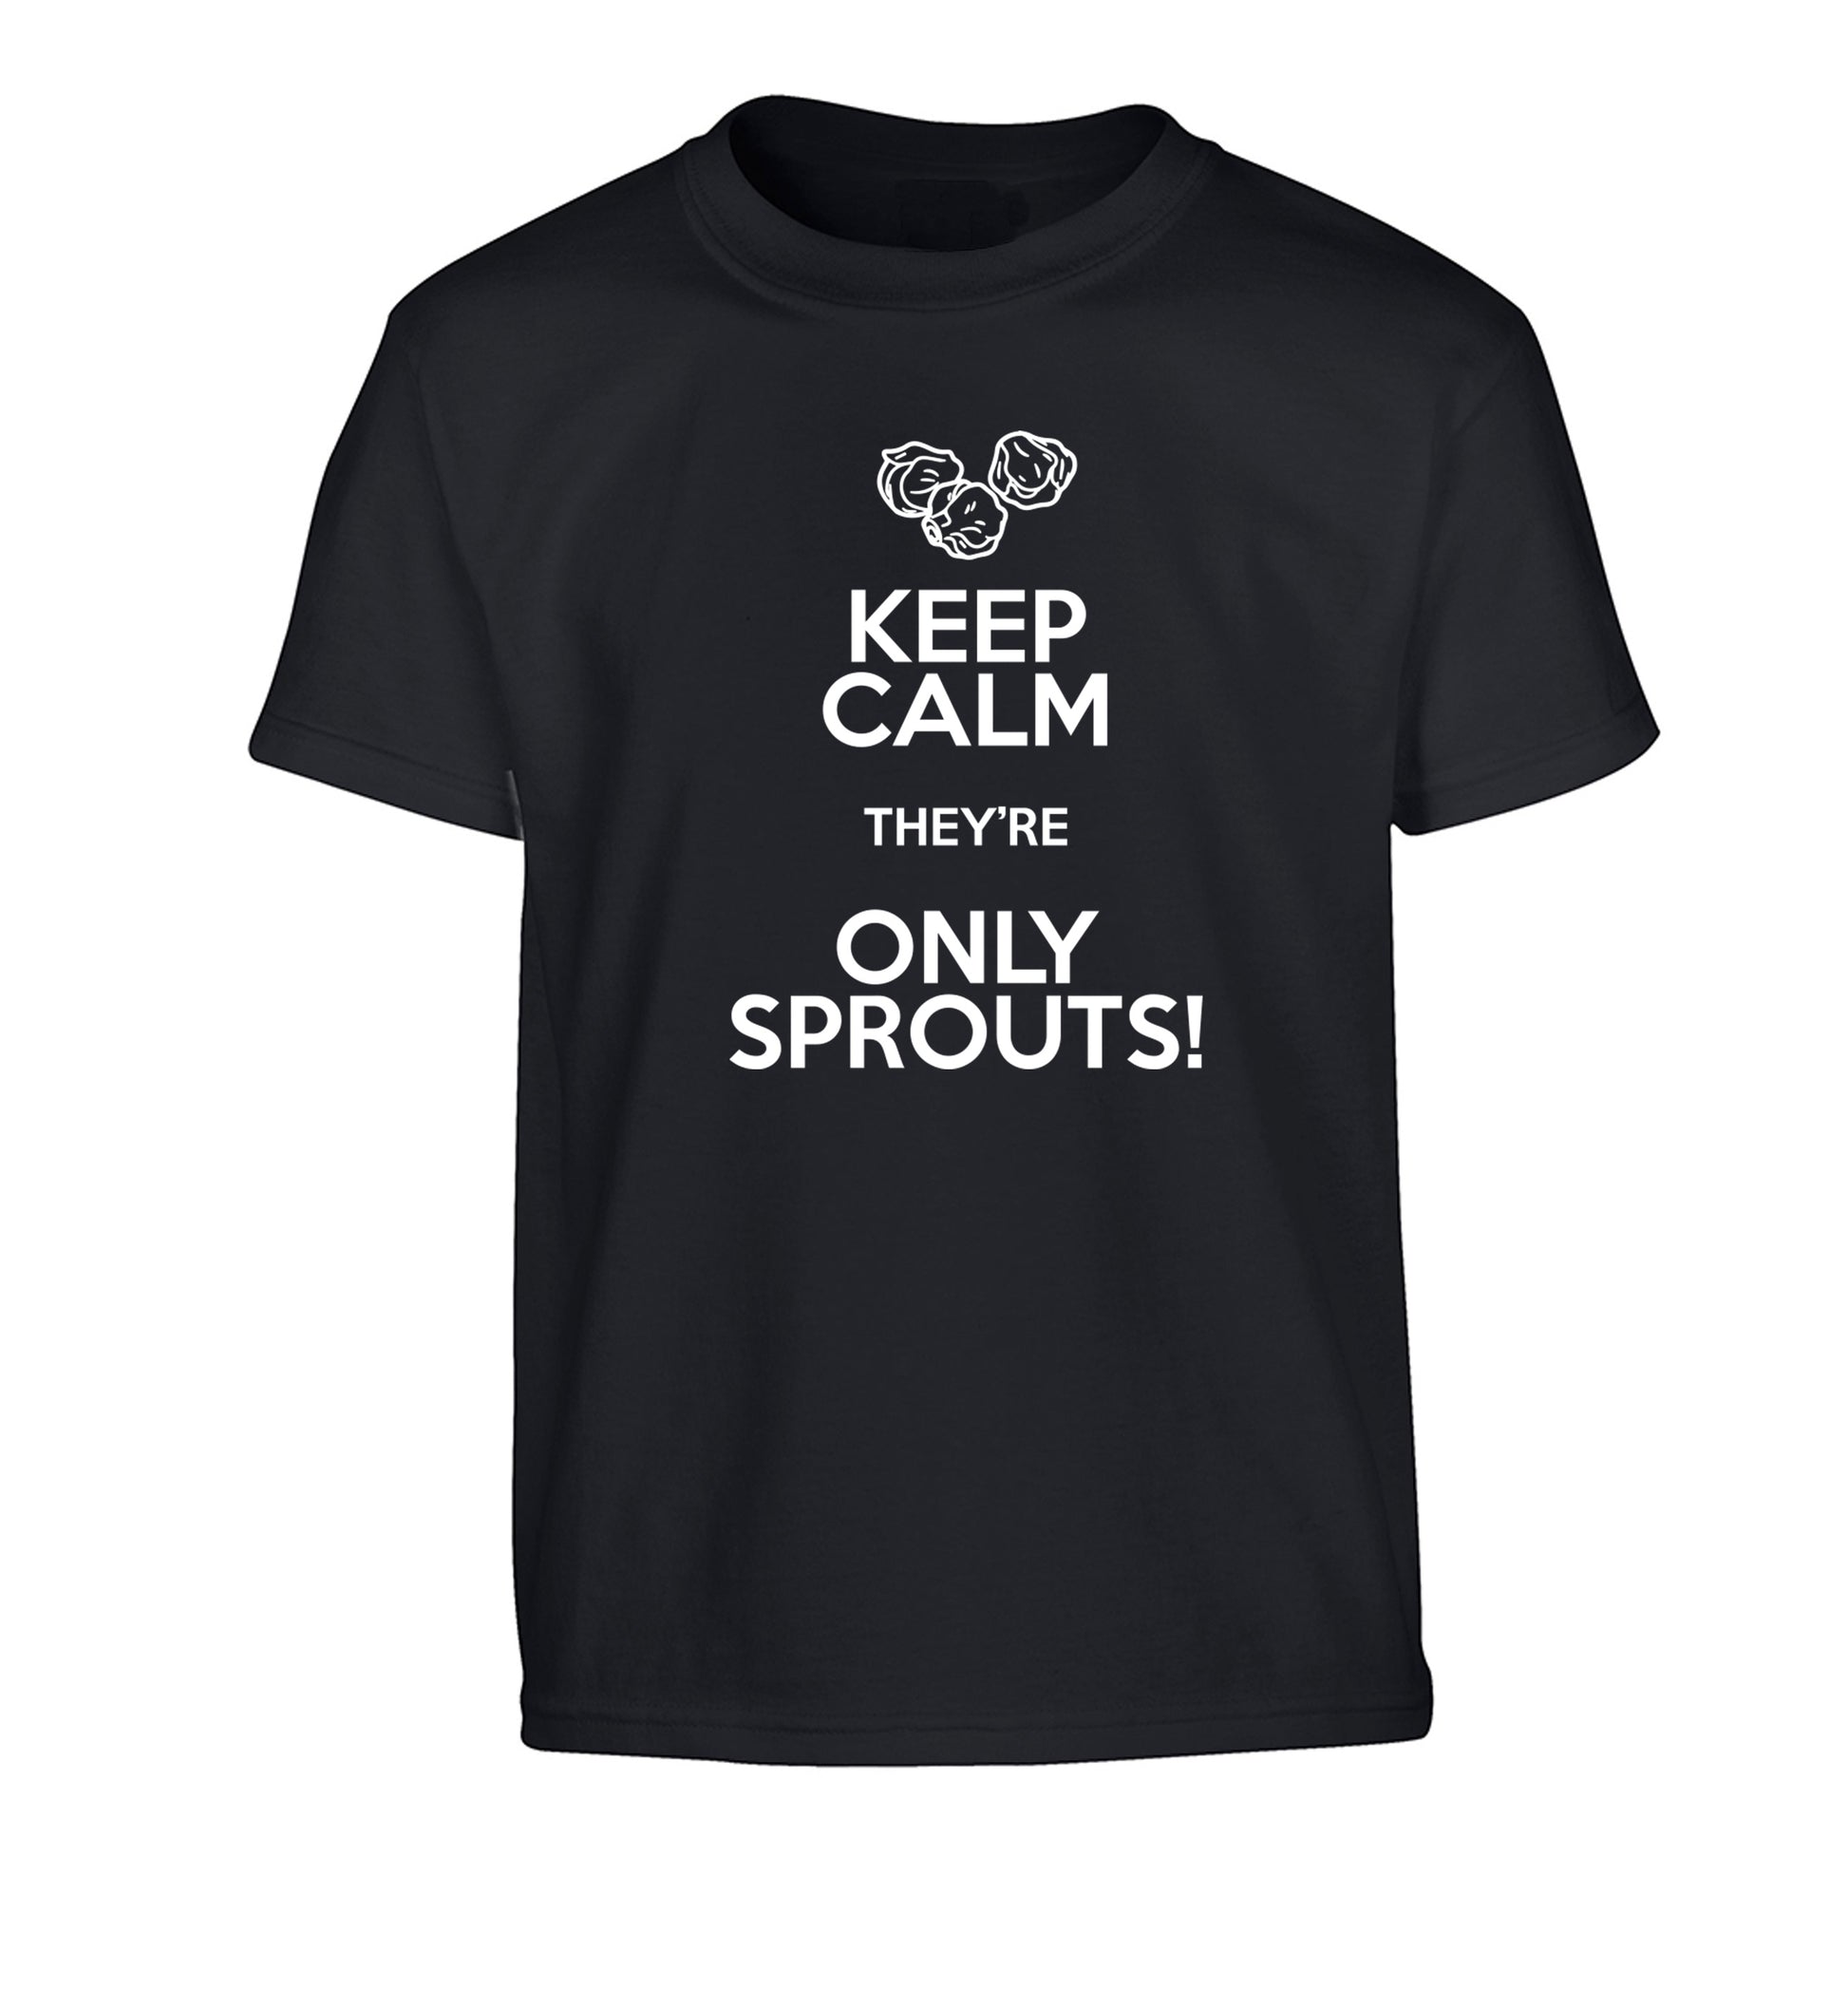 Keep calm they're only sprouts Children's black Tshirt 12-13 Years